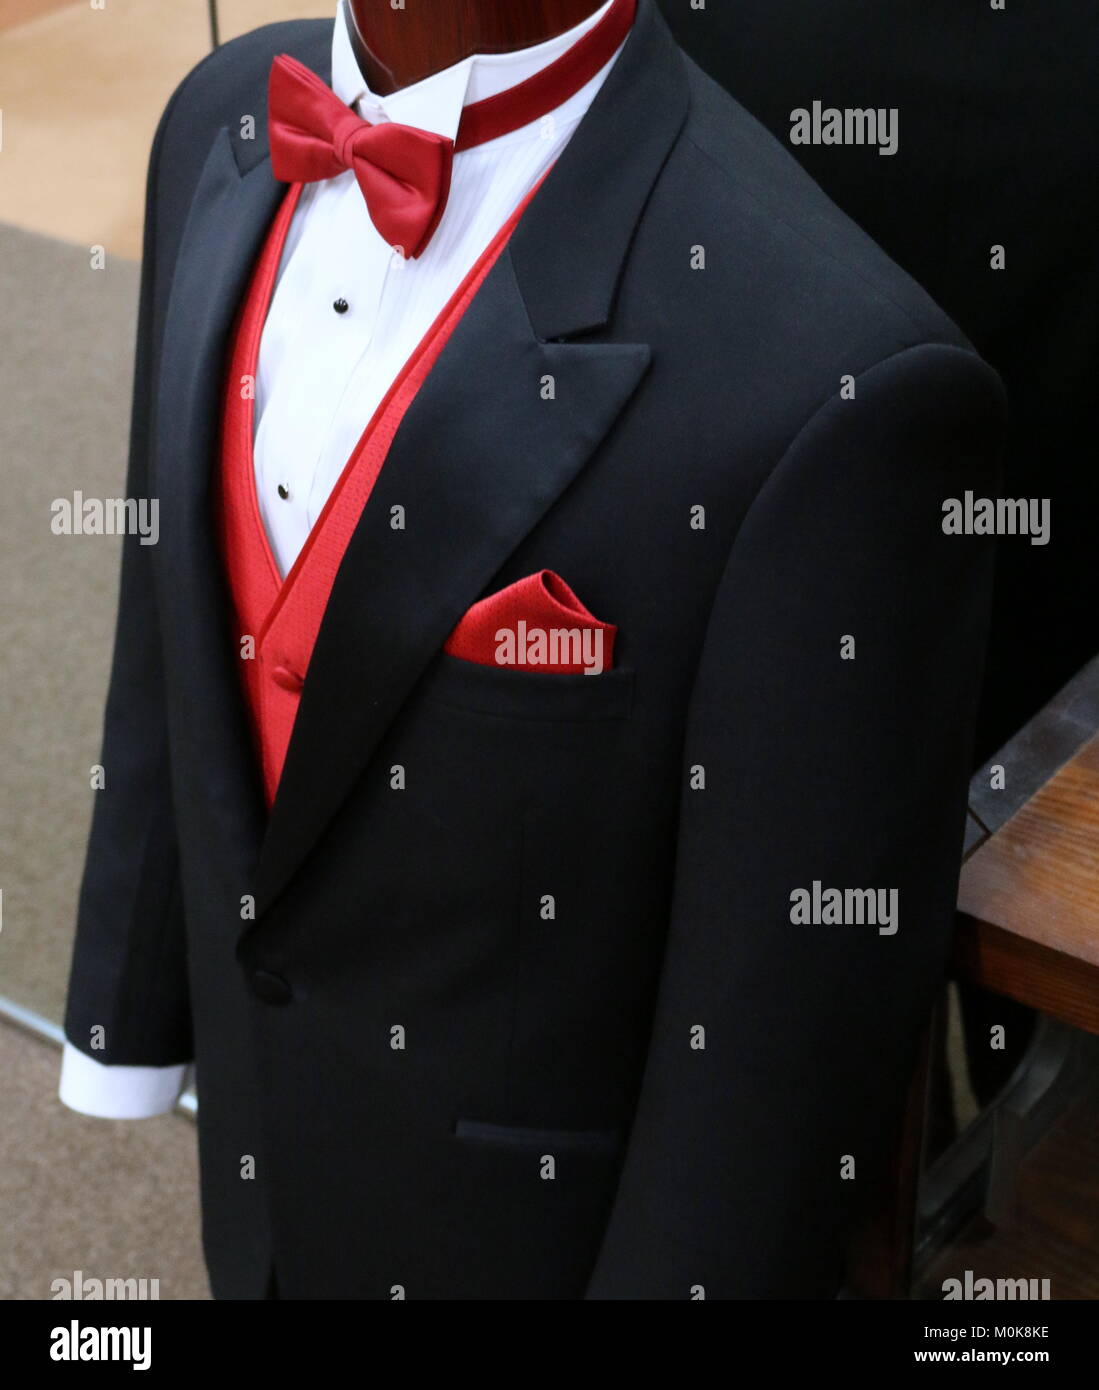 Black Tuxedo With Red Vest And Red Bow Tie Stock Photo - Alamy